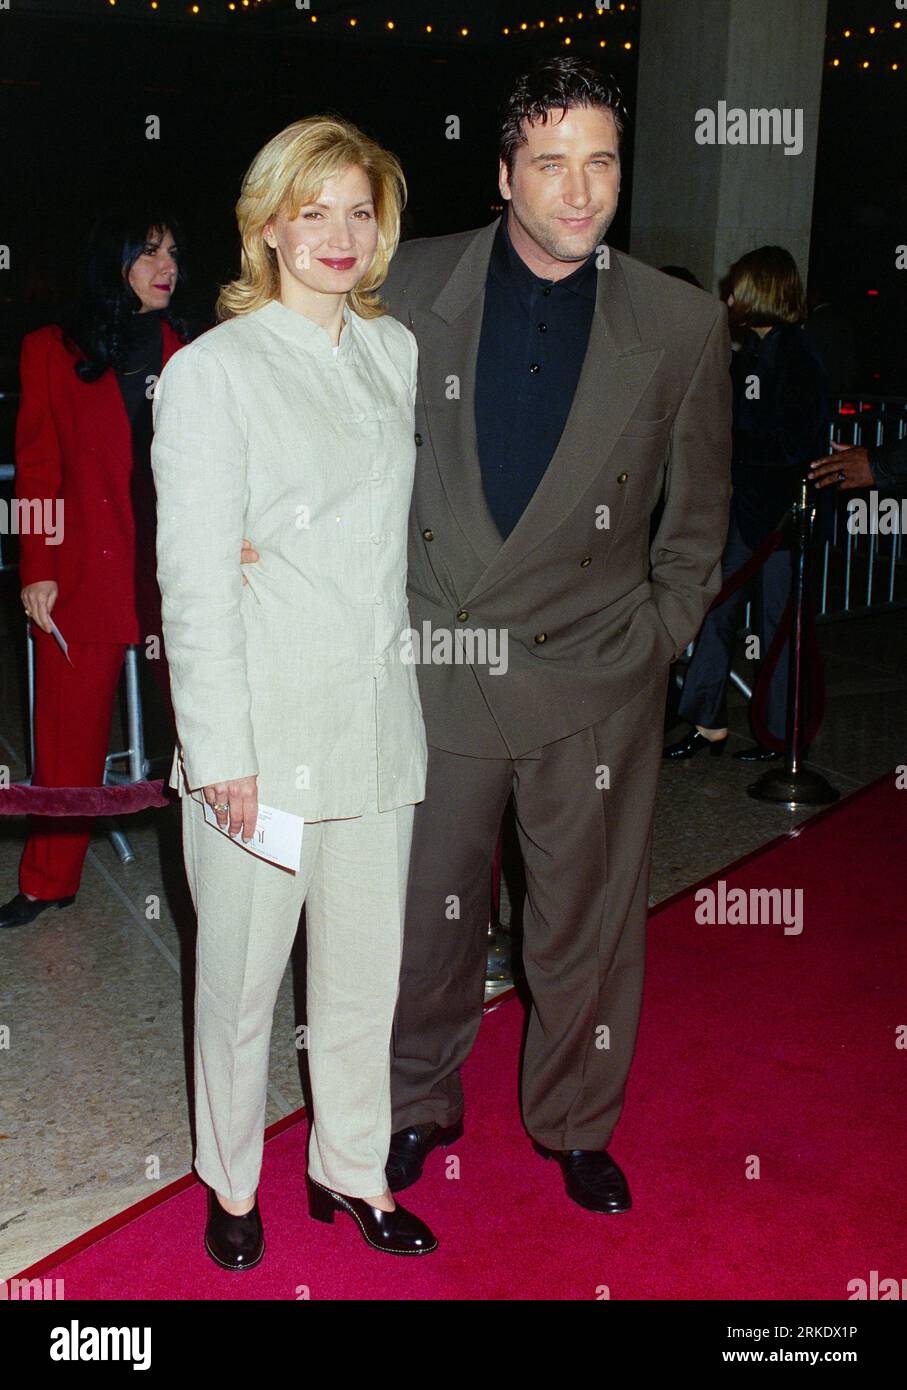 LOS ANGELES, CA. January 29, 1996: Actor Daniel Baldwin and Isabelle Hoffman at the premiere of ÒThe JurorÓ at the Cineplex Odeon Cinema, Century City Picture: Paul Smith / Featureflash Stock Photo